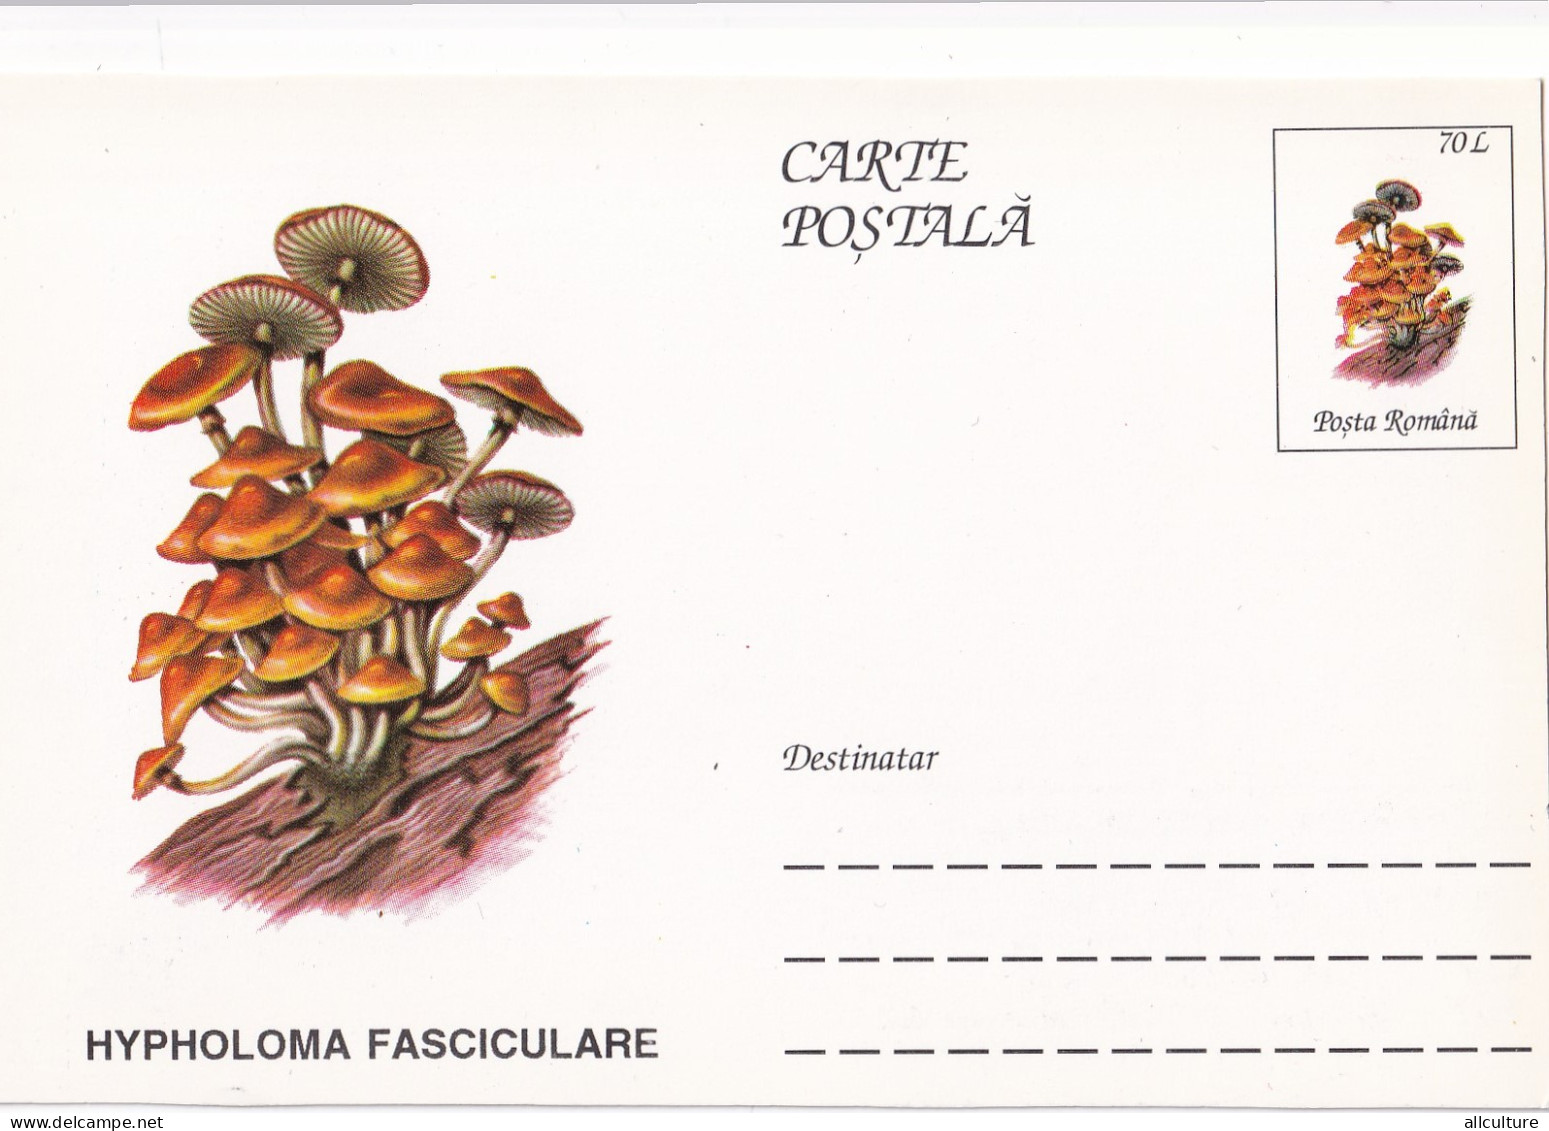 A23270  - MUSHROOM  Champignons  "HYPHOLOMA FASCICULARE  " Entier Postal,stationery Card  1996  - Champignons